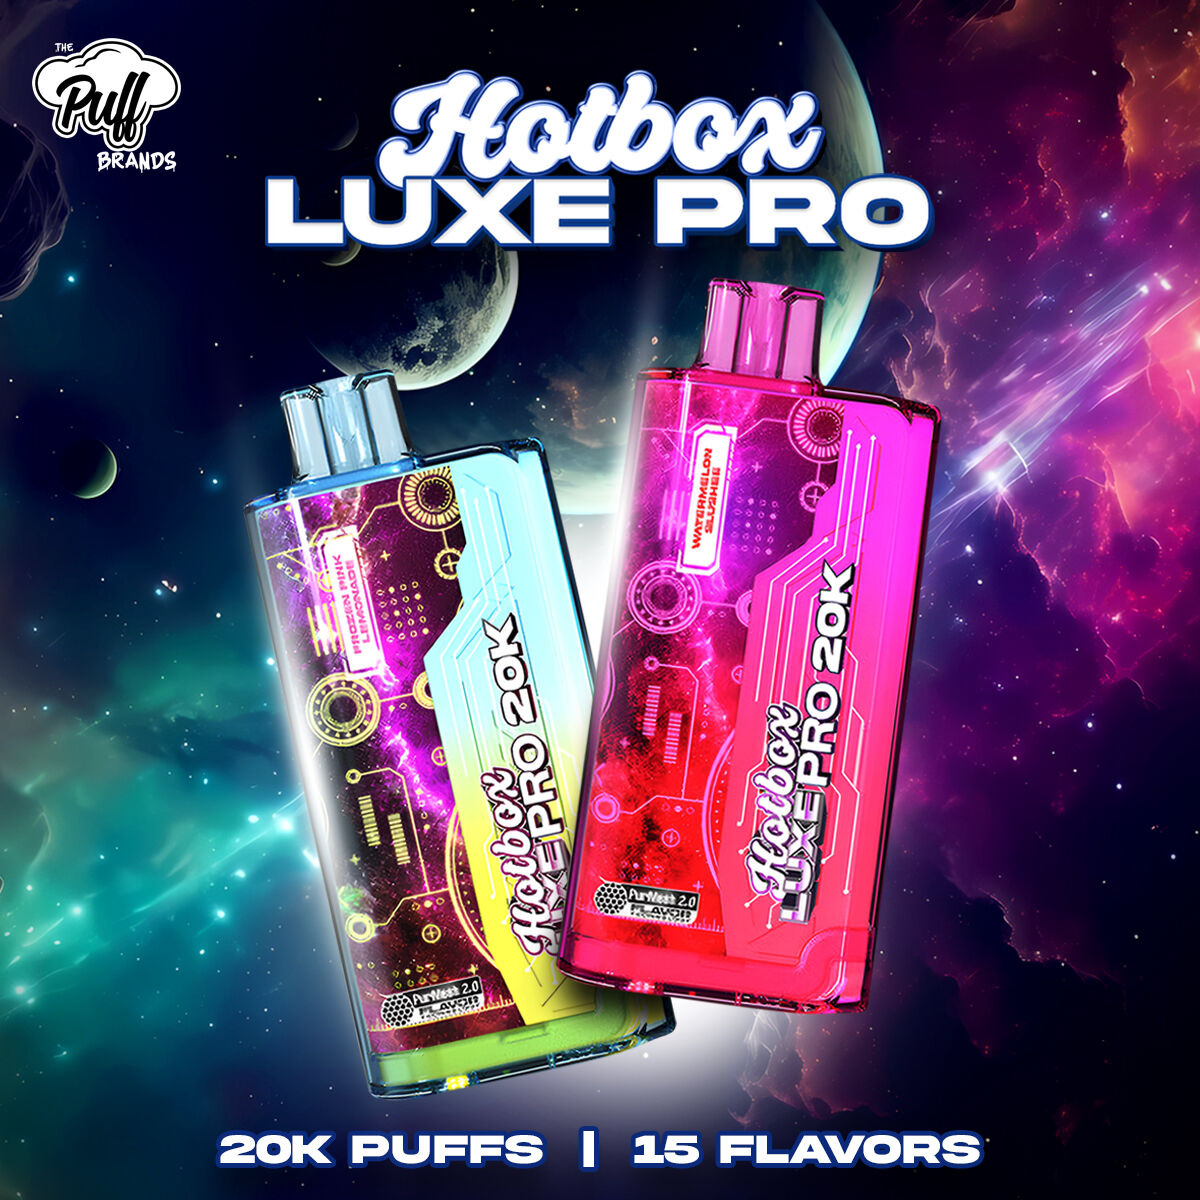 Puff Labs Hotbox Luxe Pro